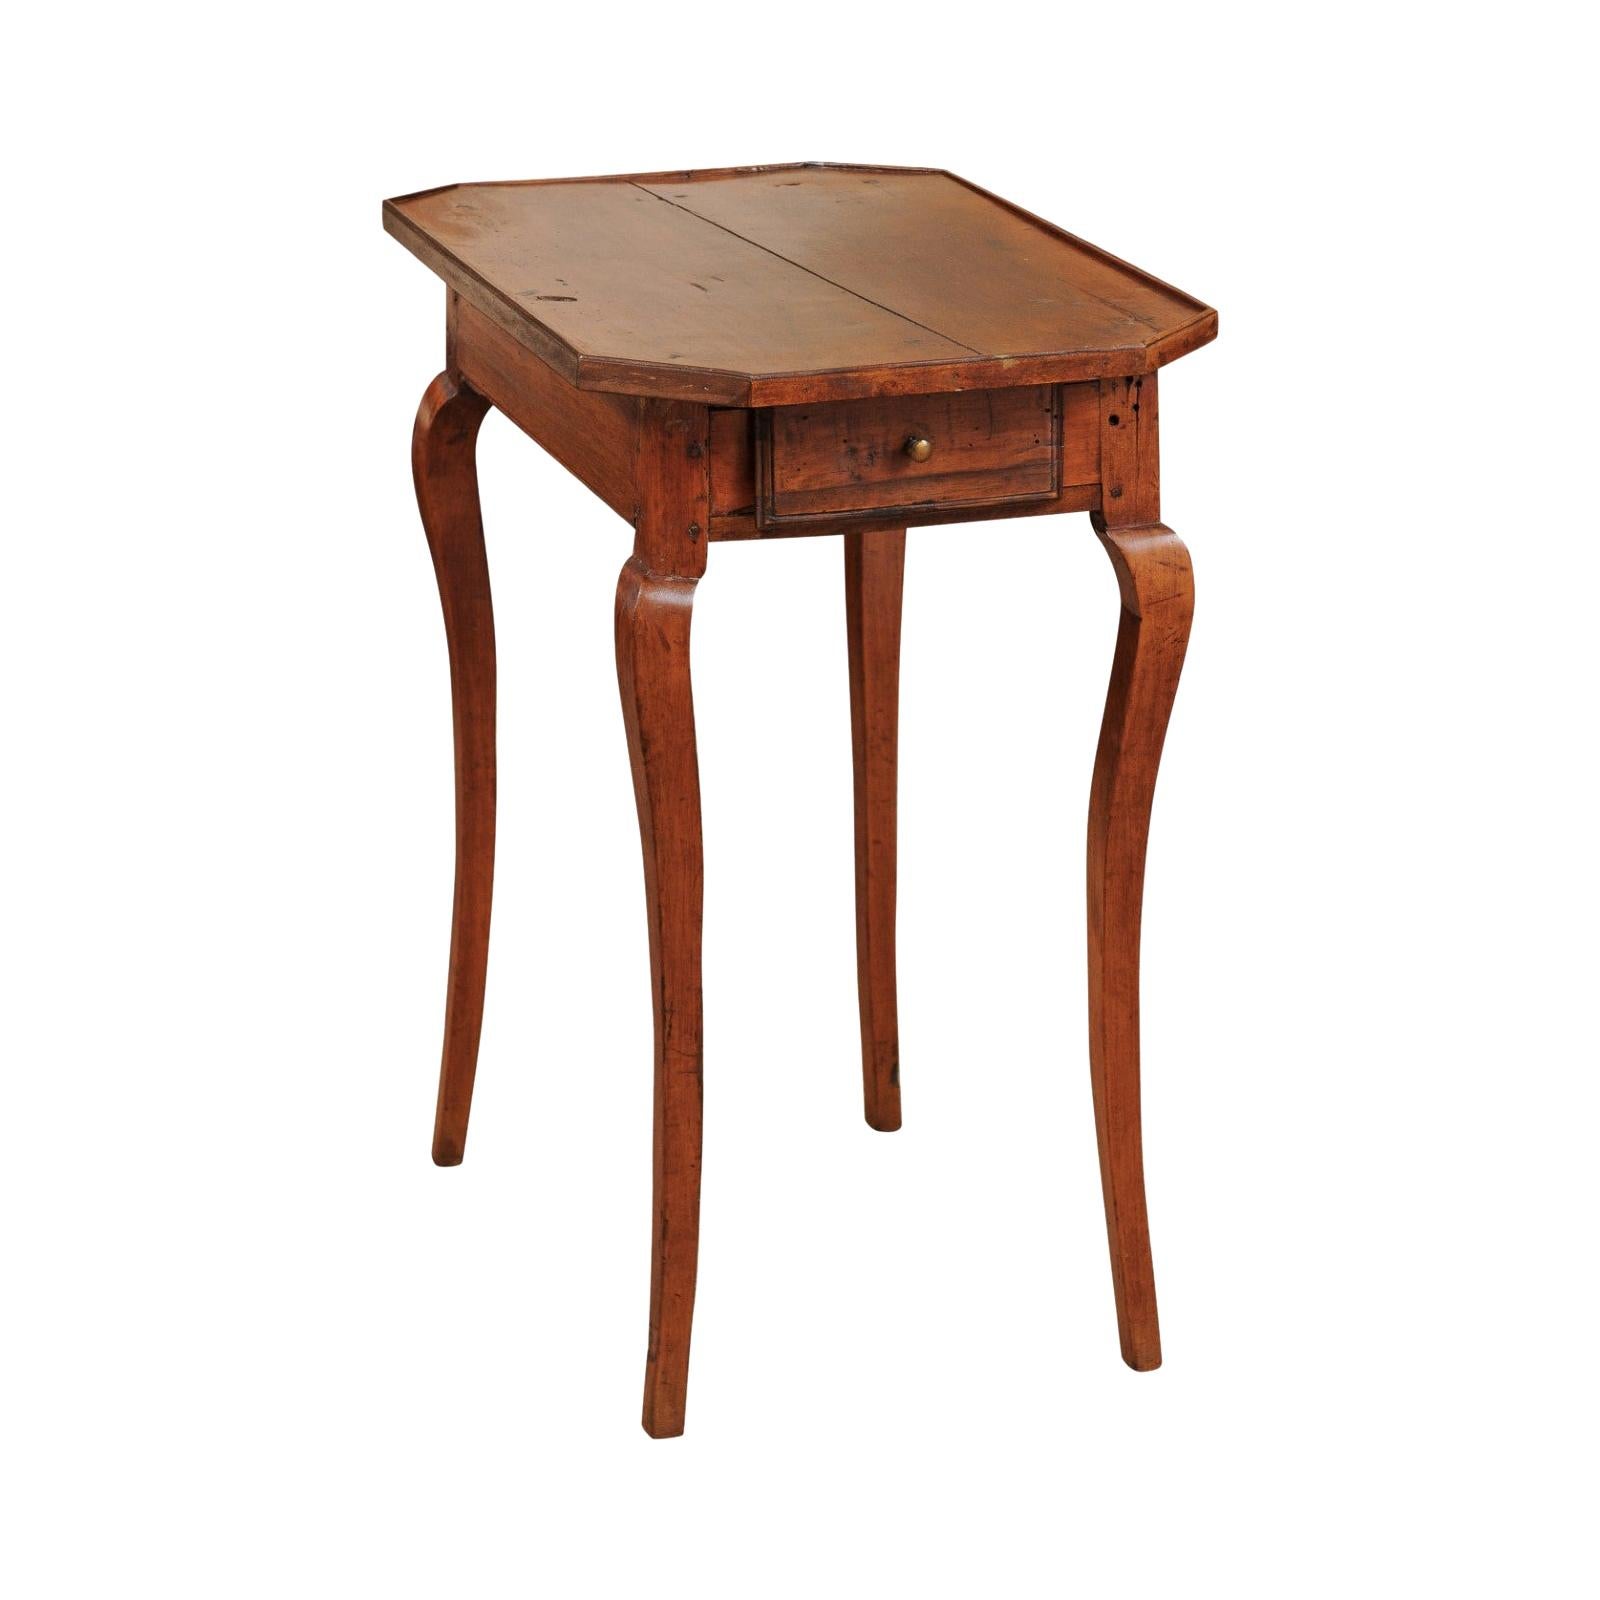 French Louis XV Walnut Side Table, Mid-18th Century